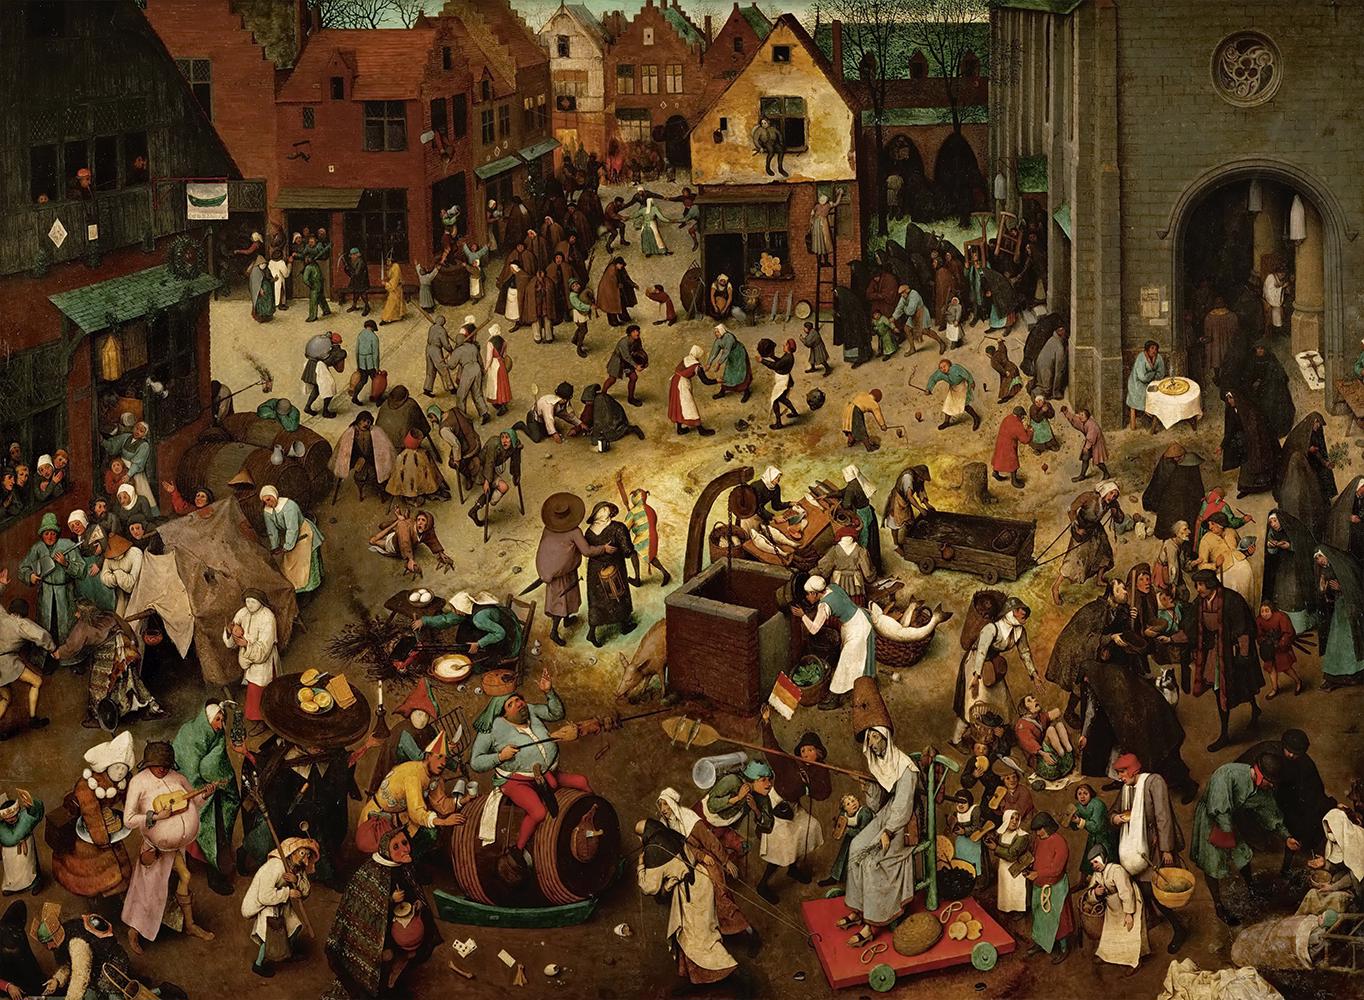 Brueghel - The Fight Between Carnival and Lent, 1559 - 4000